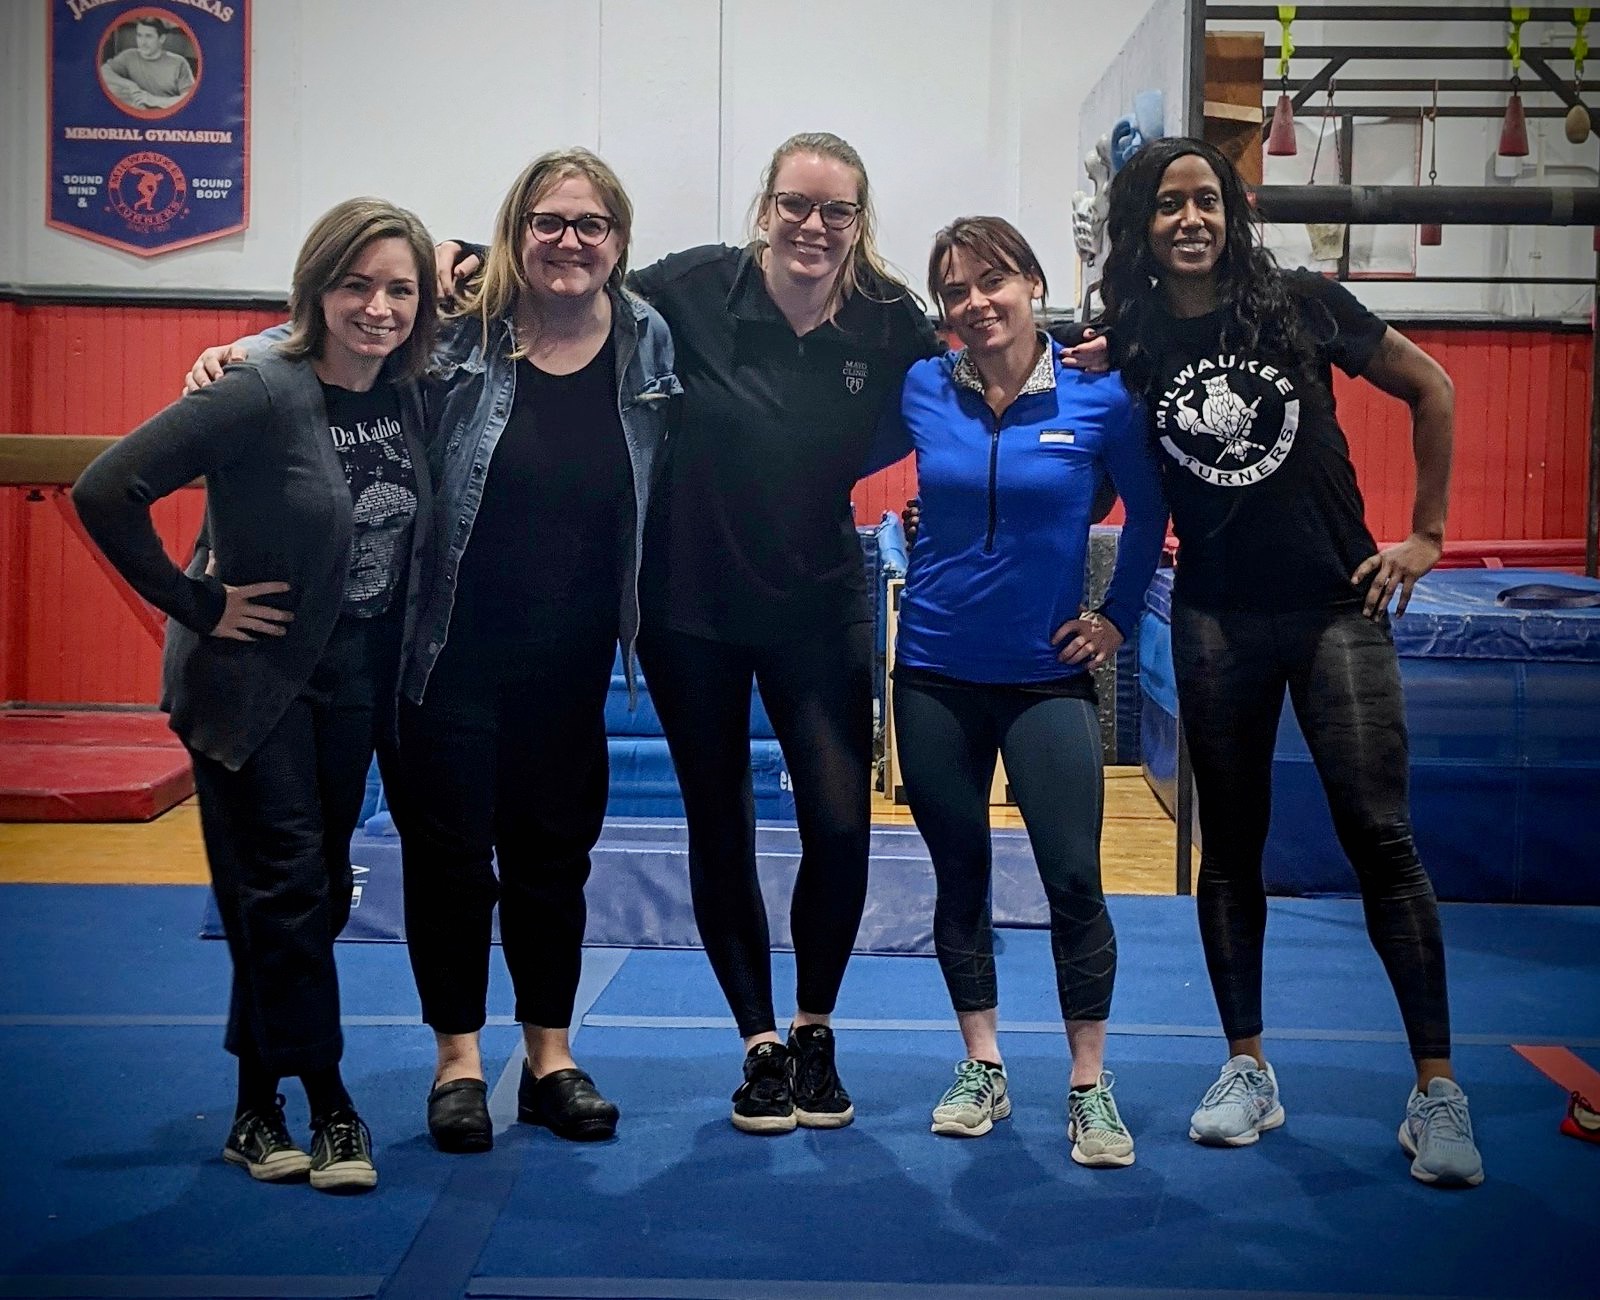 Researchers from Marquette University and Cardinal Stritch University are exploring exercise with women impacted by mass incarceration. From left: Heather Hlavka, Jennifer Ohlendorf, Madeline Wright, Noelle Brigden and Amber Tucker. Photo provided by Noelle Brigden/NNS.